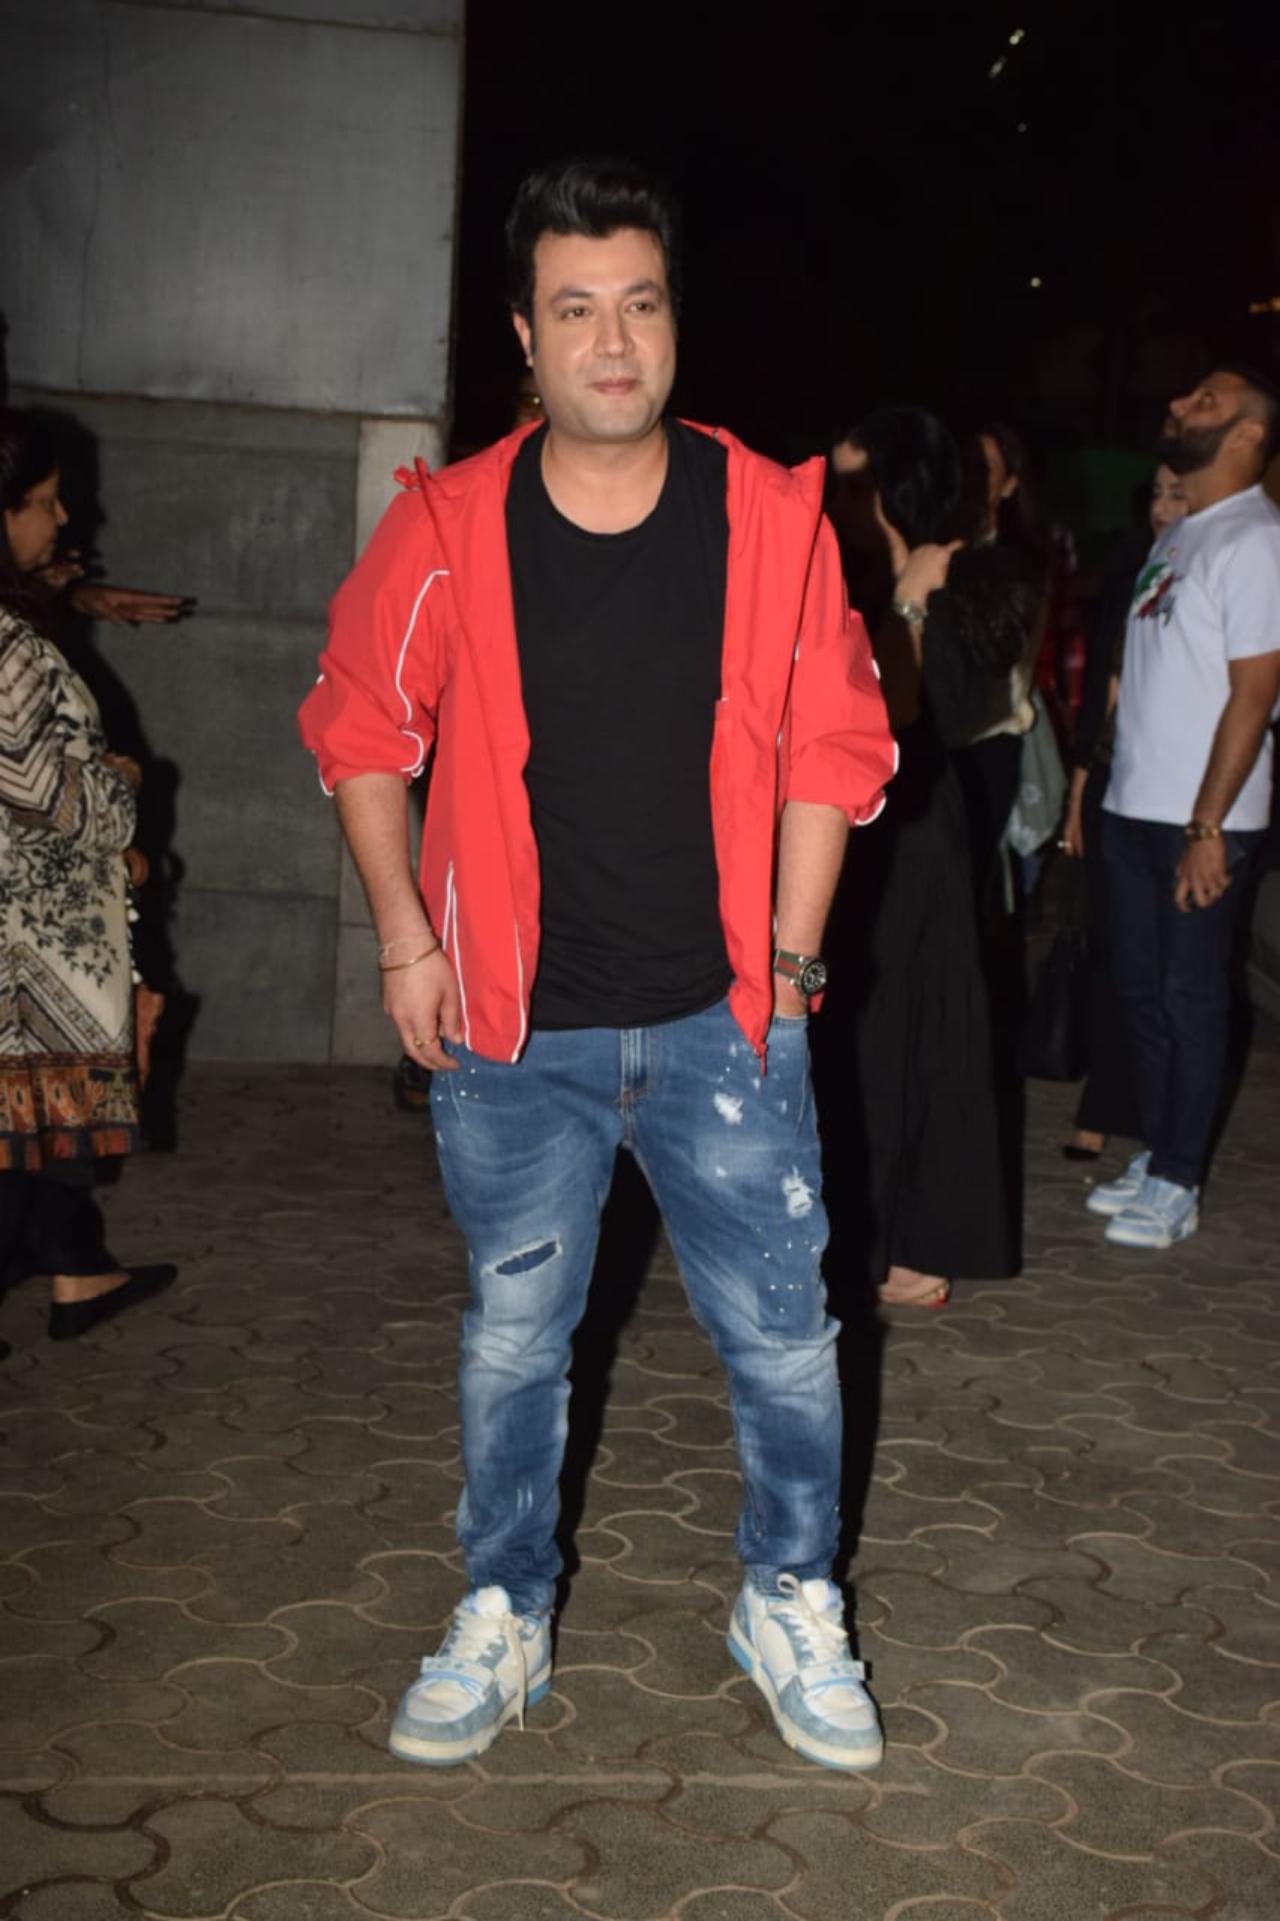 Actor Varun Sharma donned a bright red jacket over a black t-shirt and blue jeans